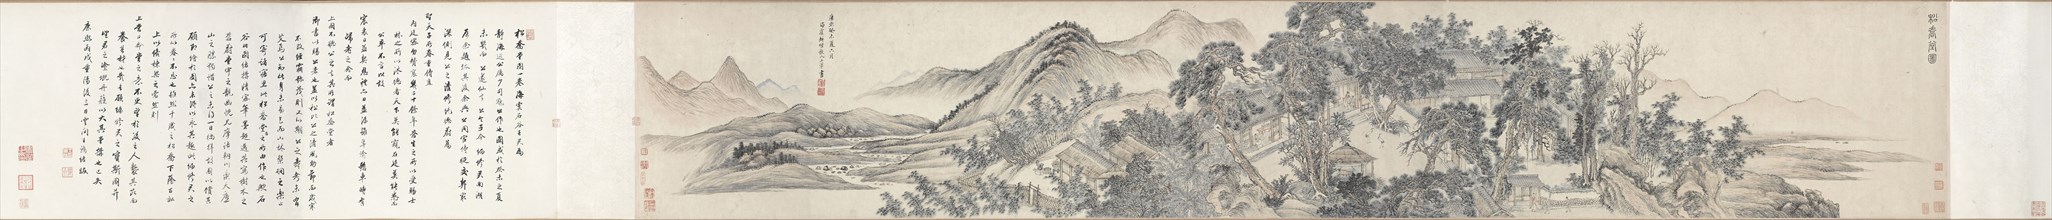 Hall of Lofty Pines, 1703. Wang Hui (Chinese, 1632-1717). Handscroll, ink on paper; overall: 40.7